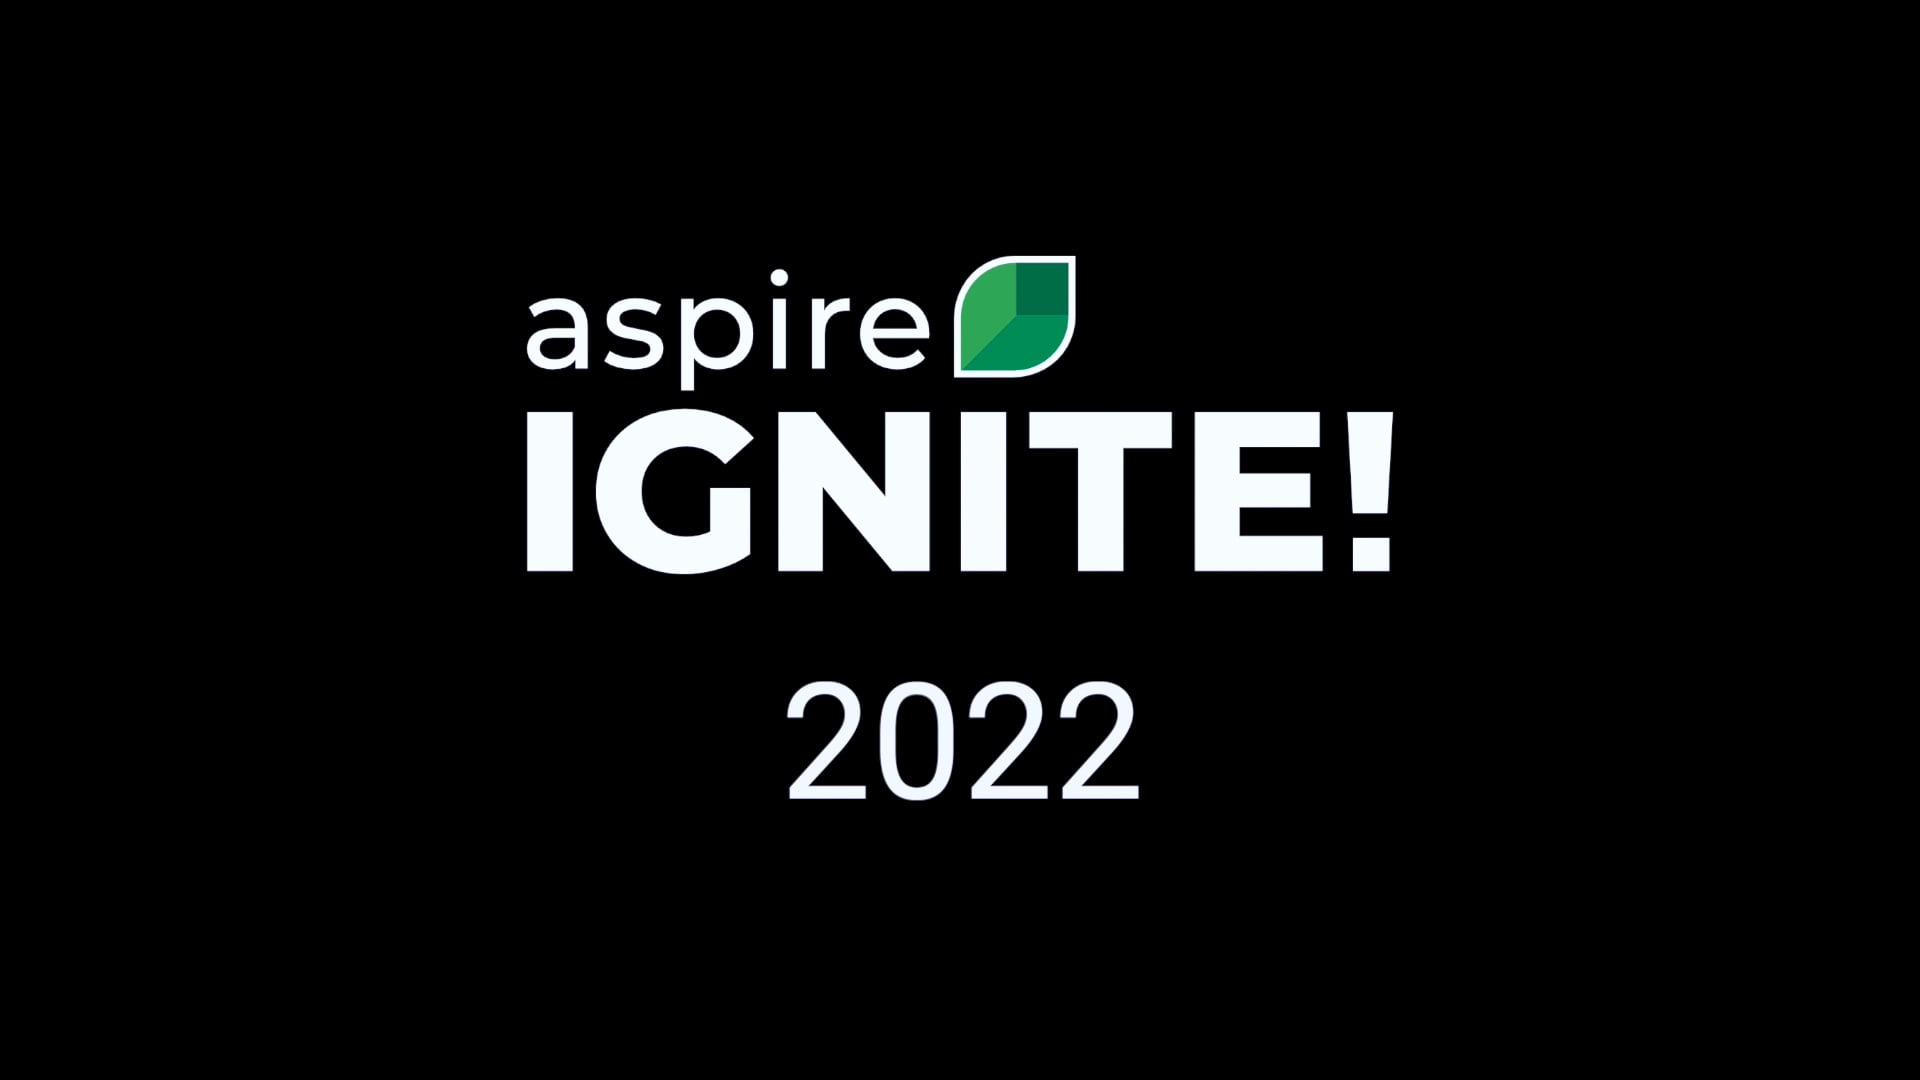 Thank You for Attending IGNITE! 2022